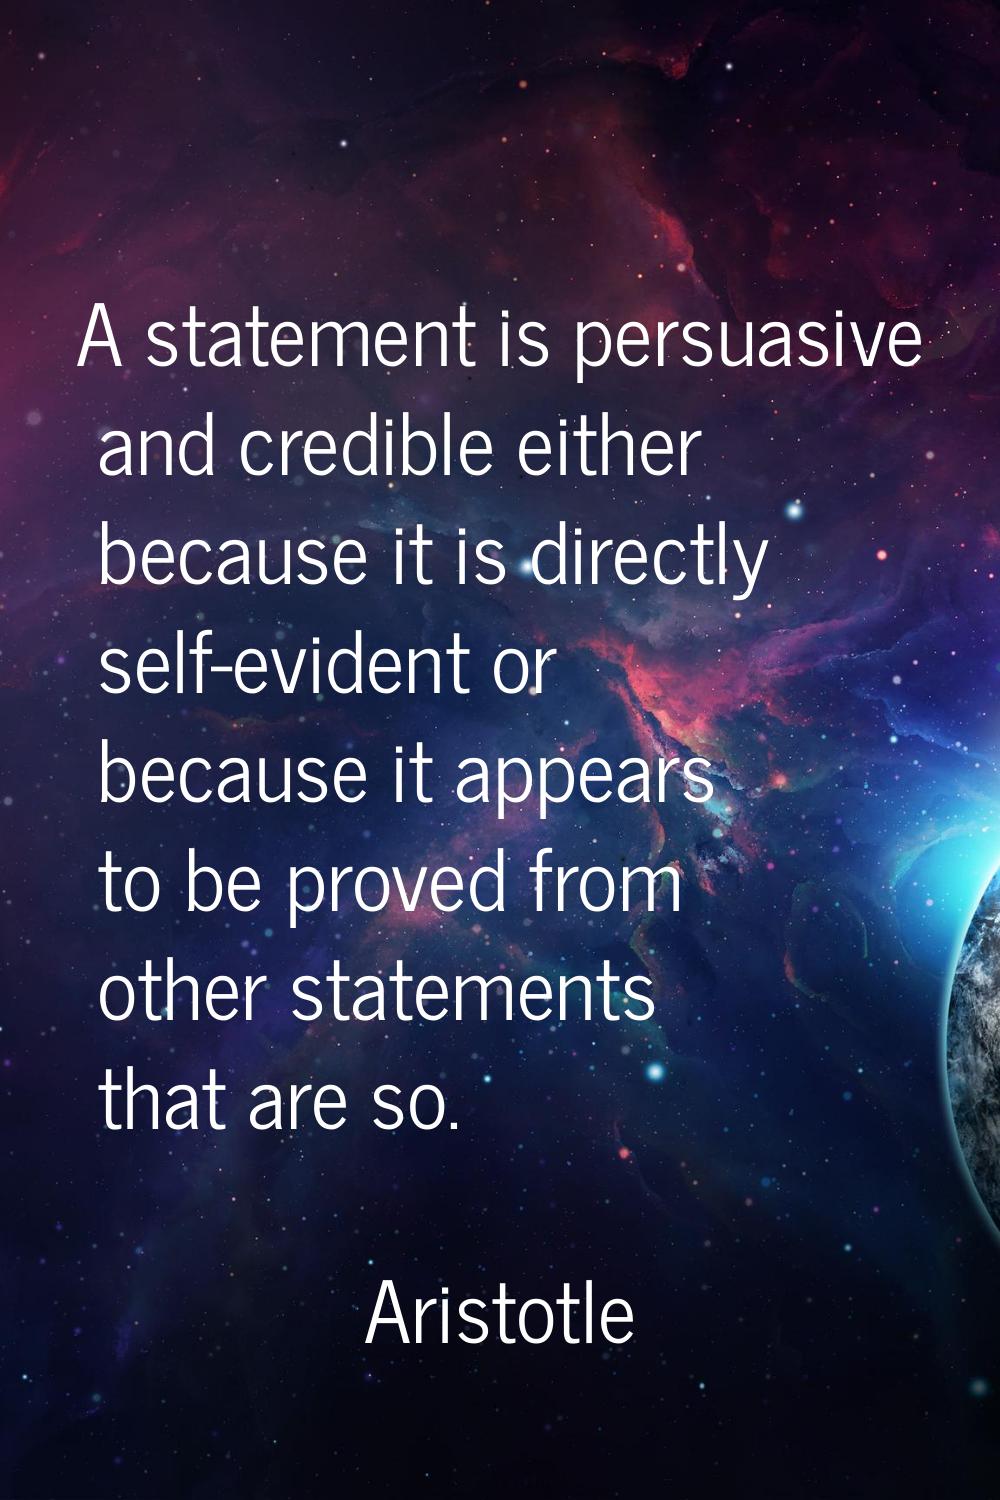 A statement is persuasive and credible either because it is directly self-evident or because it app